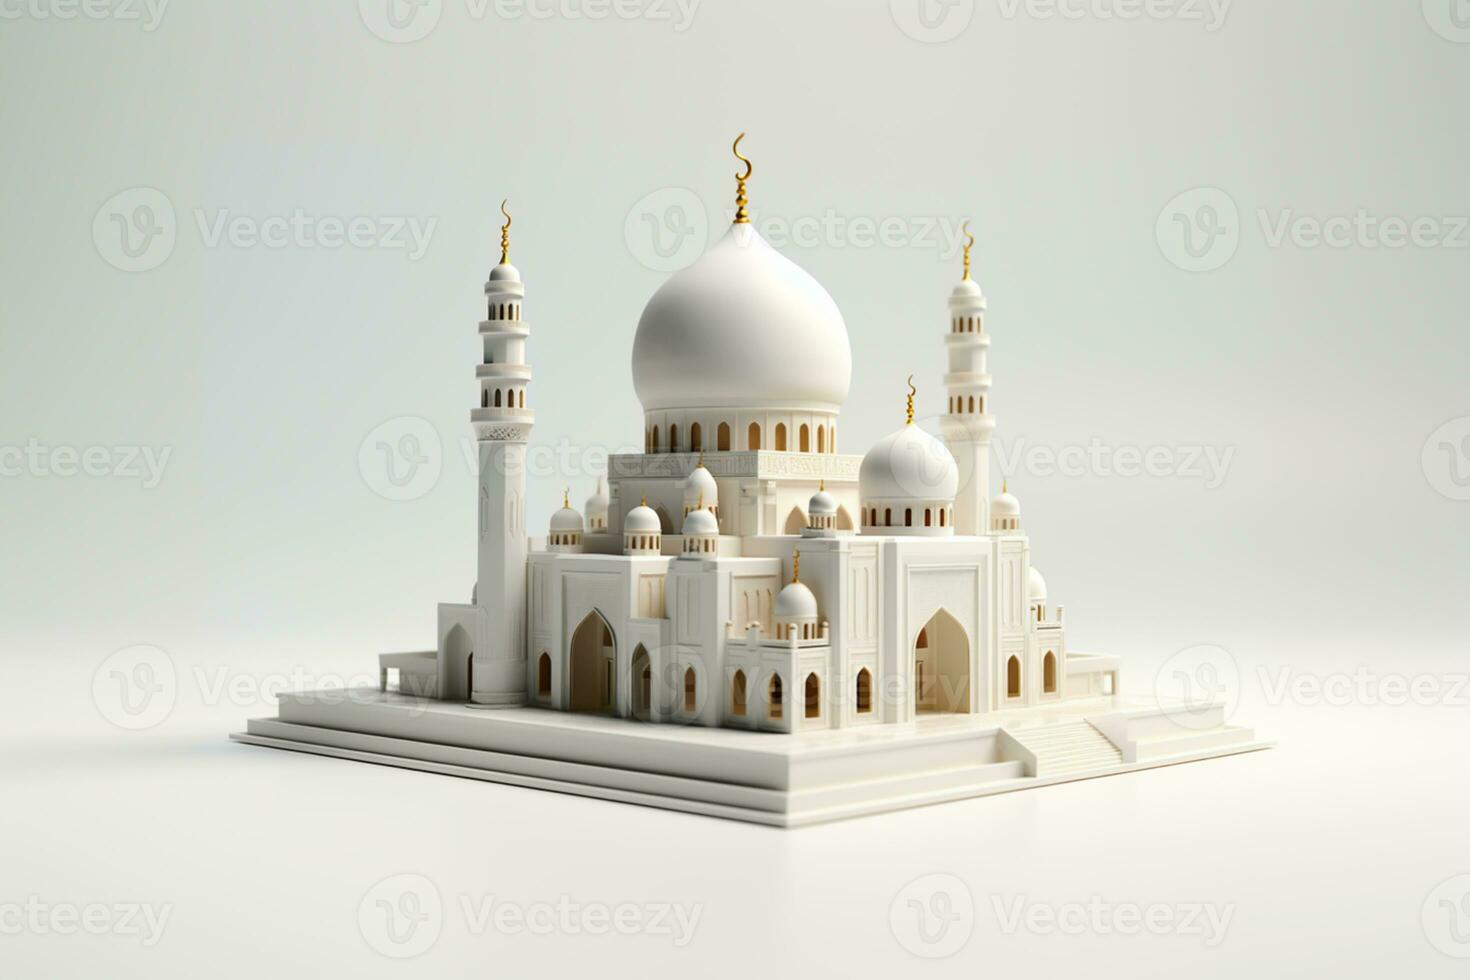 3d rendering of a white mosque with a golden dome photo